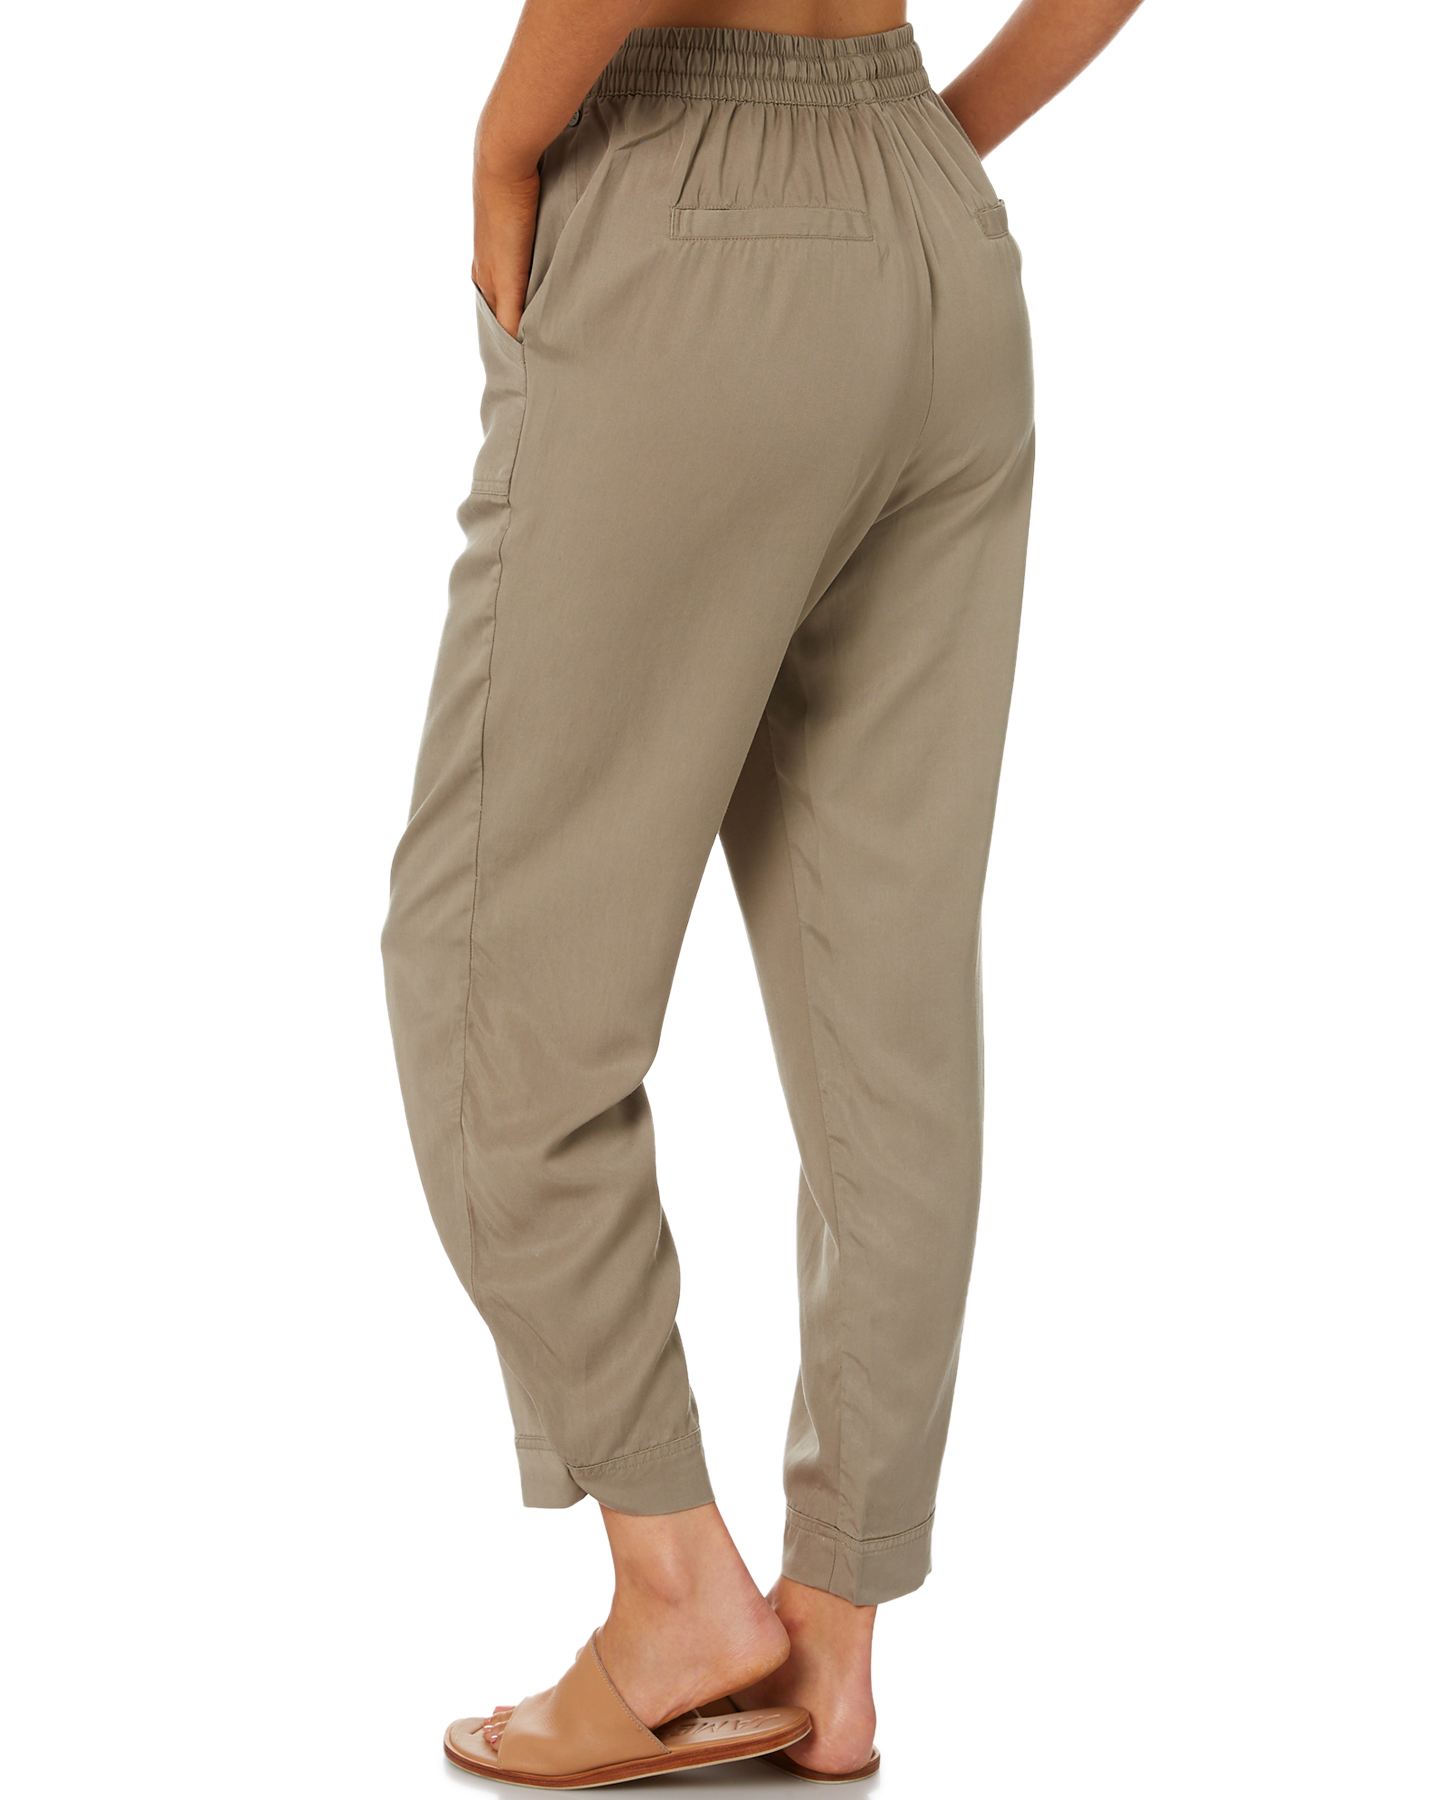 Rusty Bounds Slouchy Pant - Army | SurfStitch